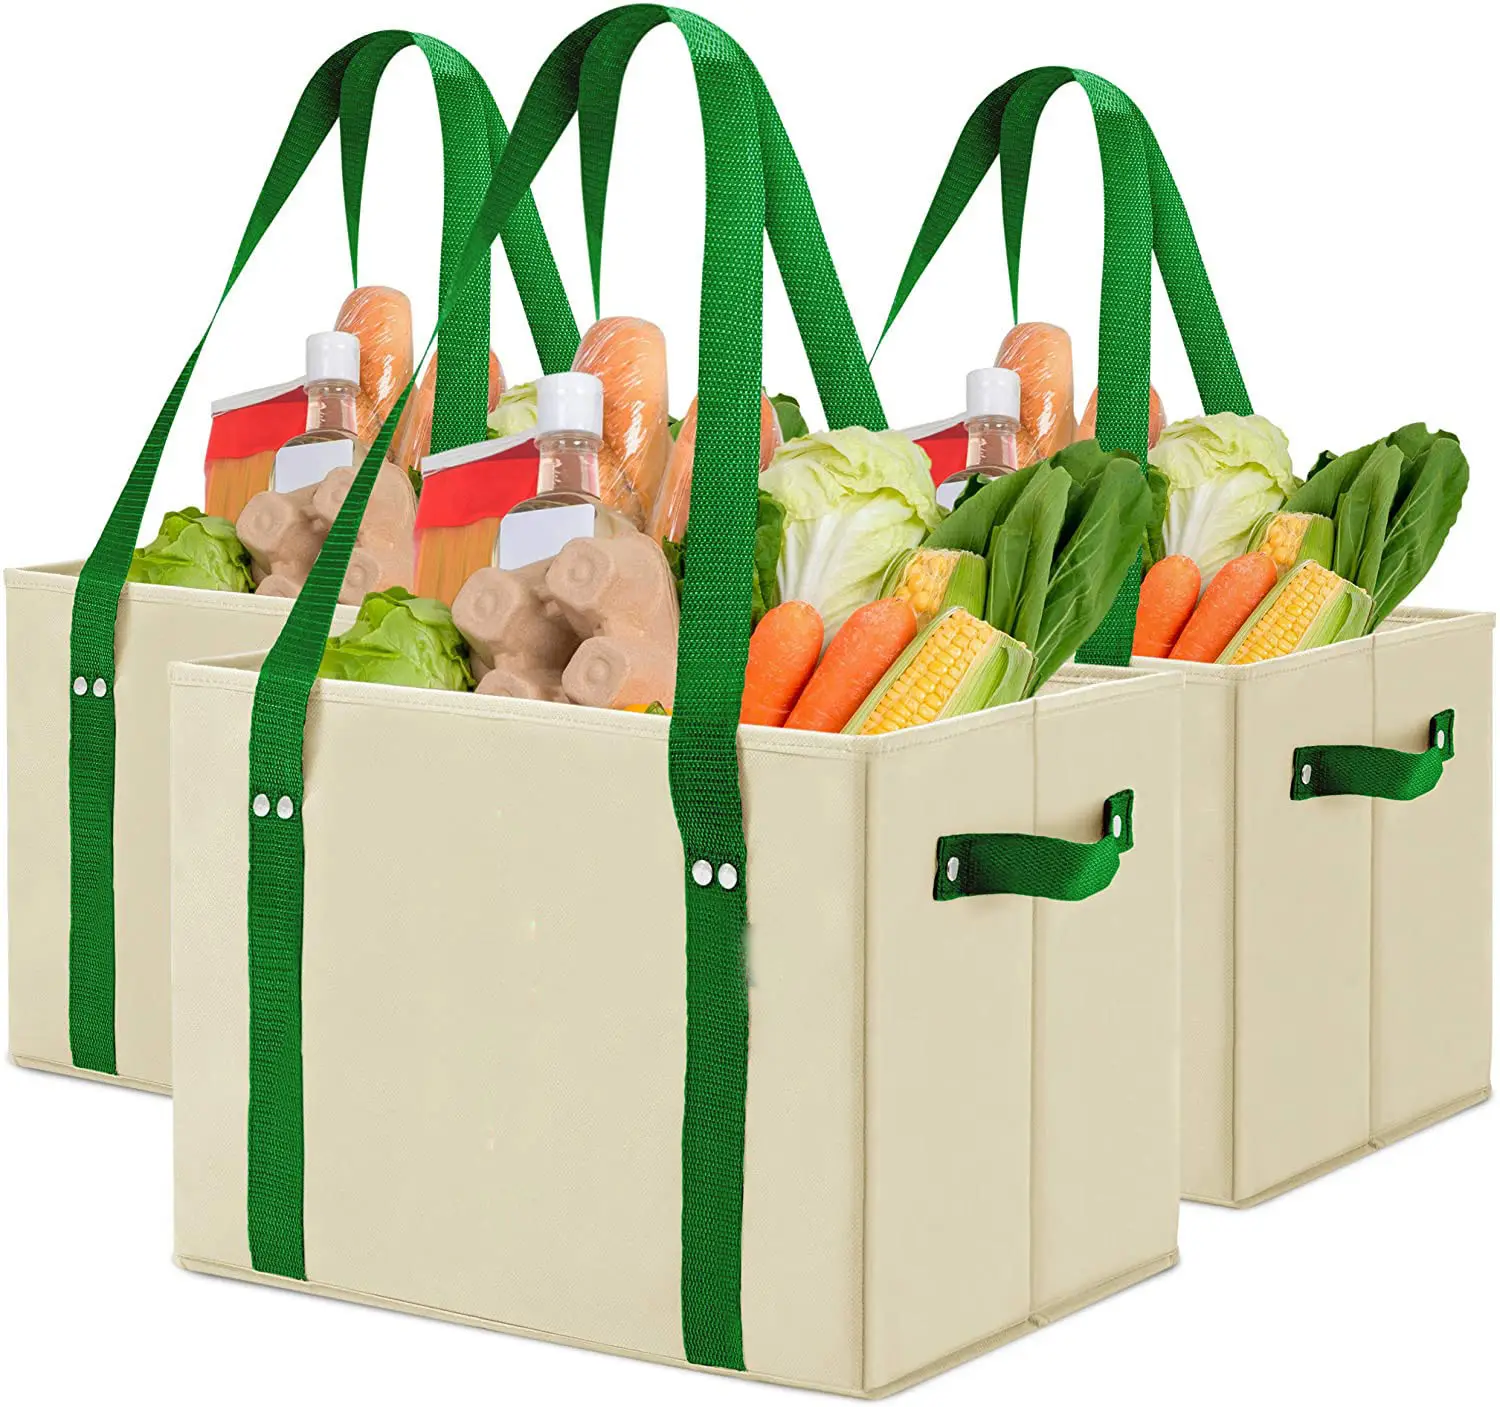 Reusable Grocery Bags Heavy Duty Foldable Washable Canvas Tote Shopping Basket Box Bag Basket